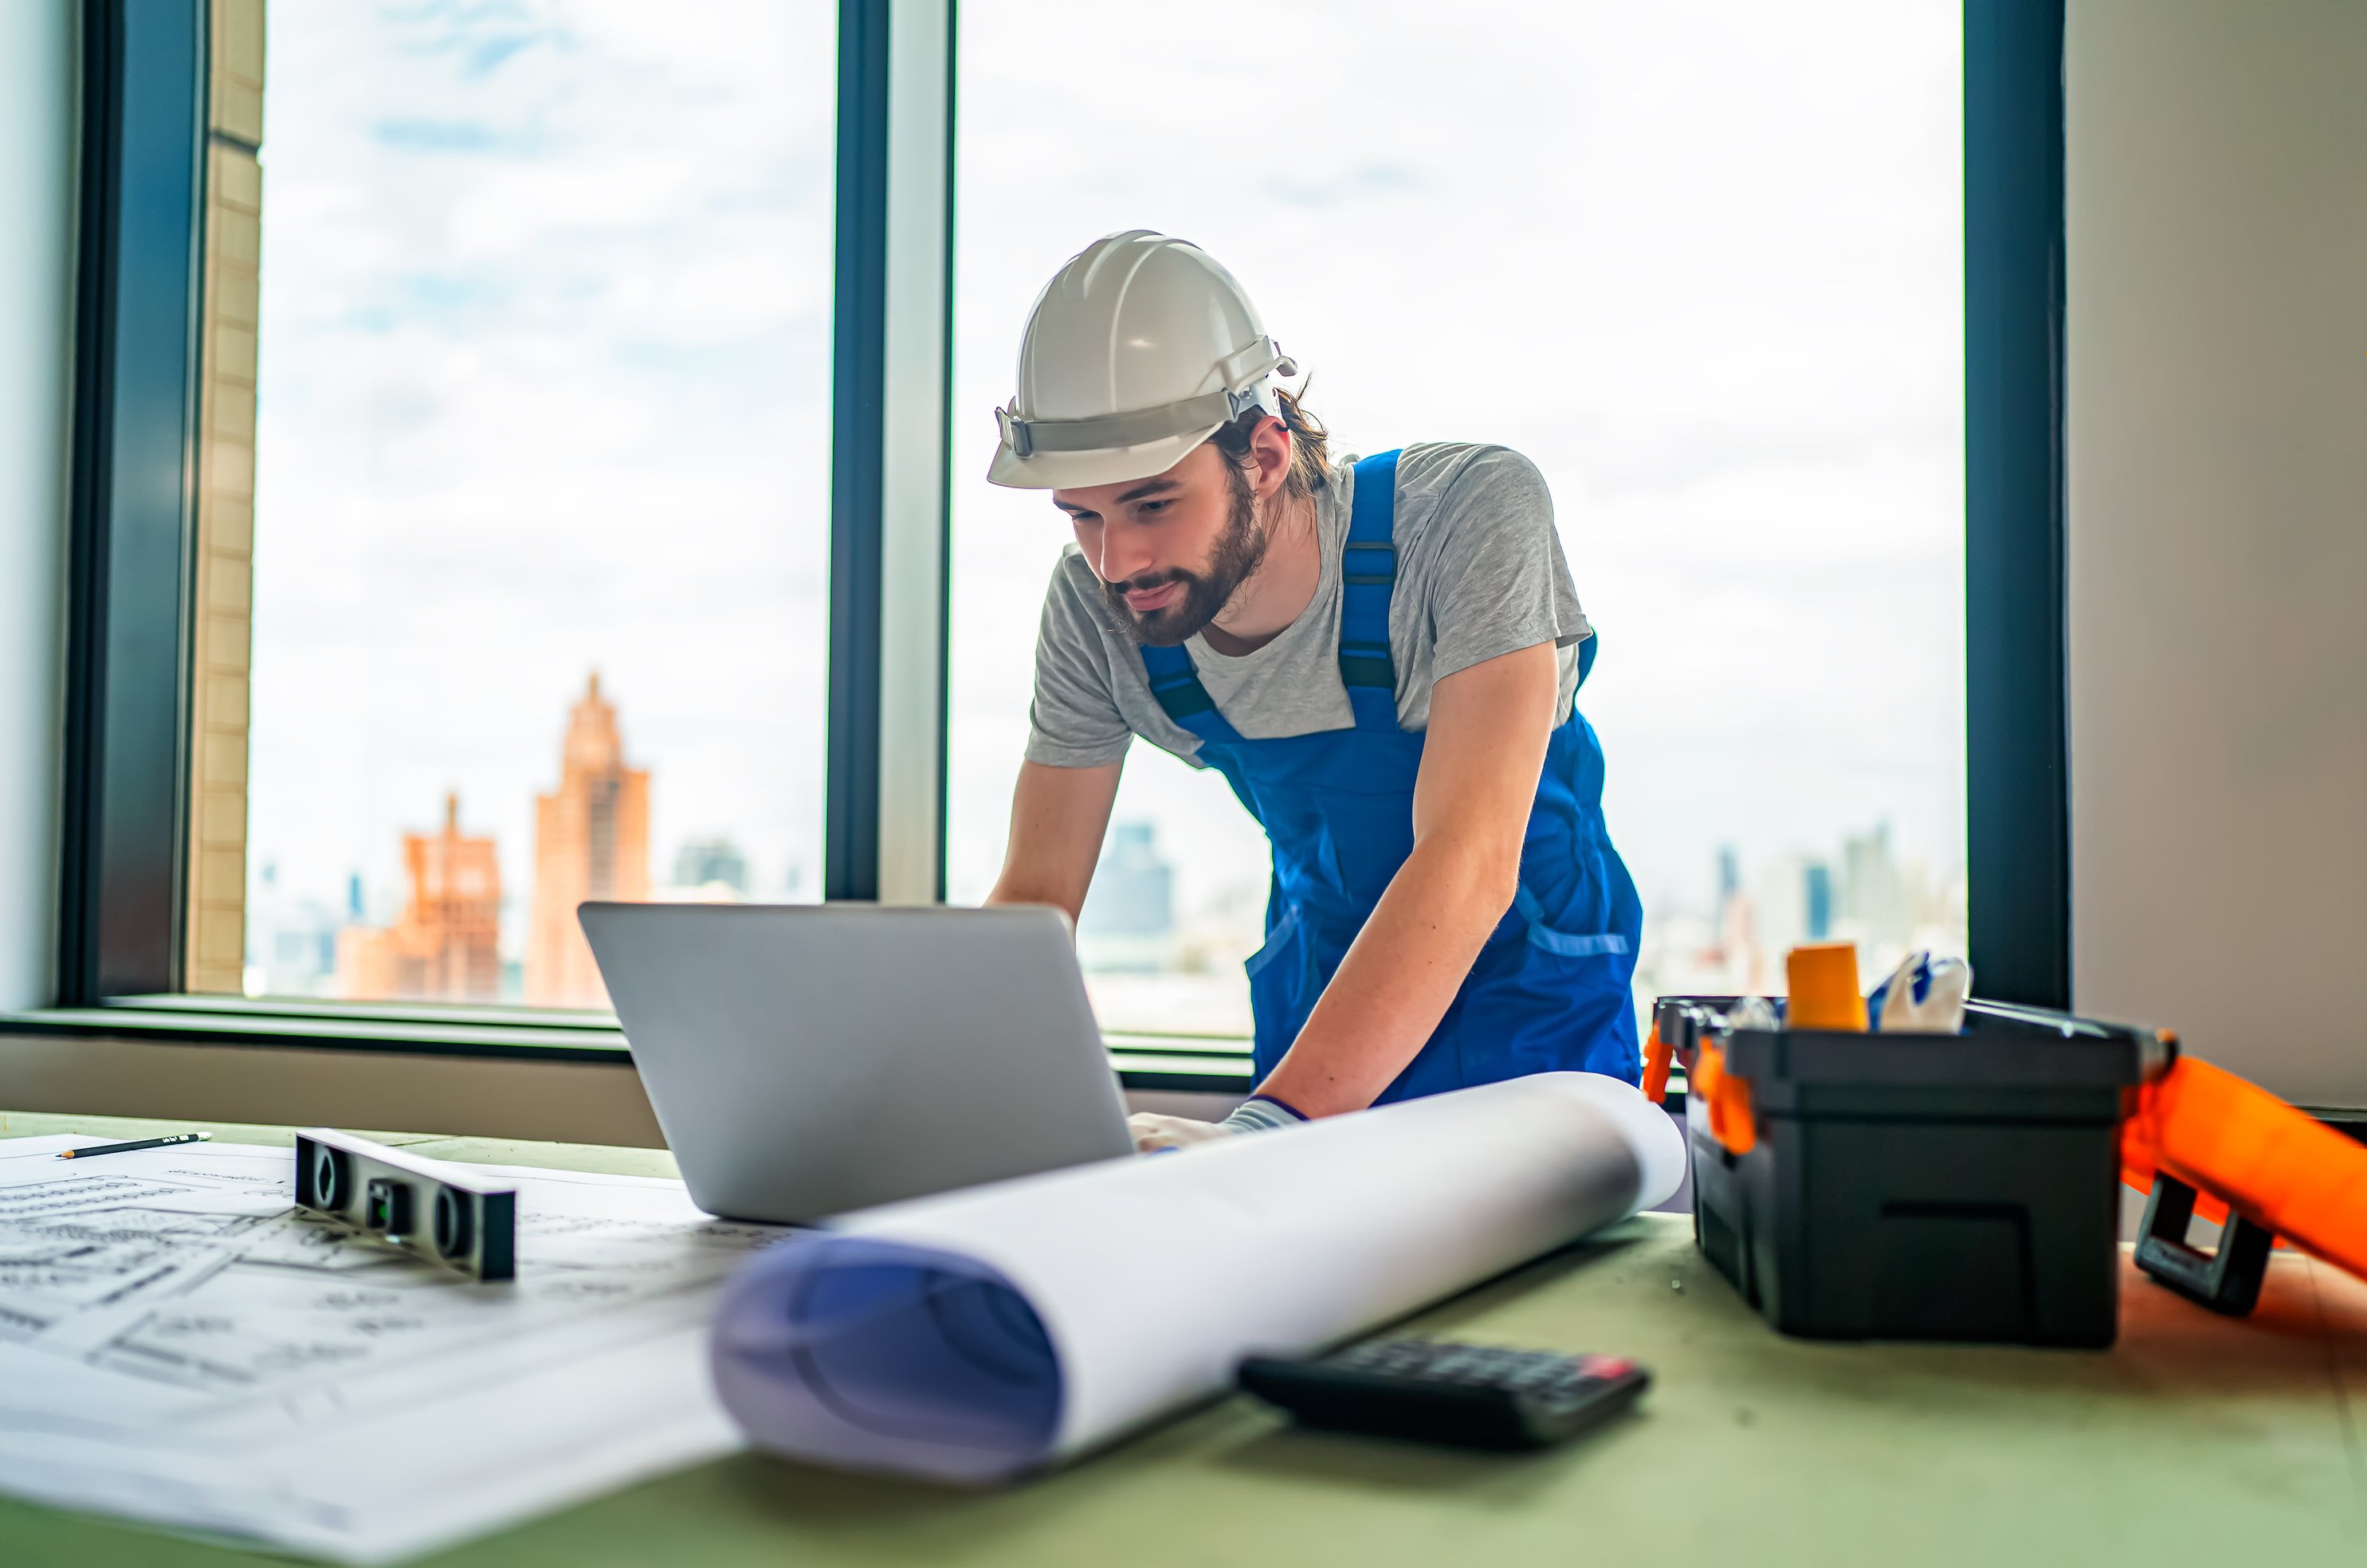 construction engineer or foreman worker checking information on laptop